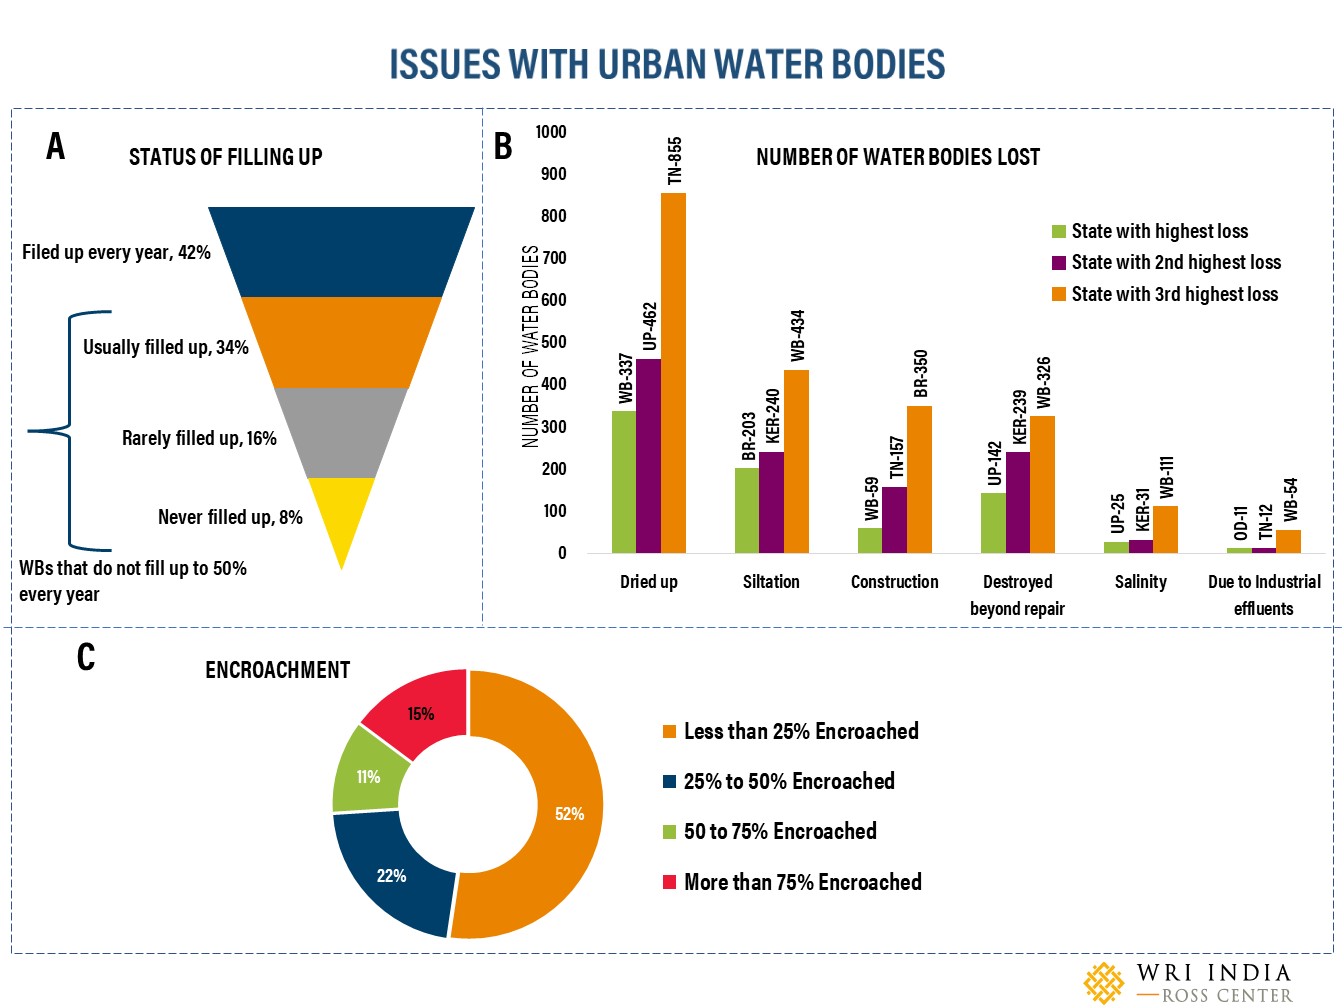 Figure 4 Key Issues of Urban Water Bodies (A) Capacity Filled (B) Water Bodies Lost